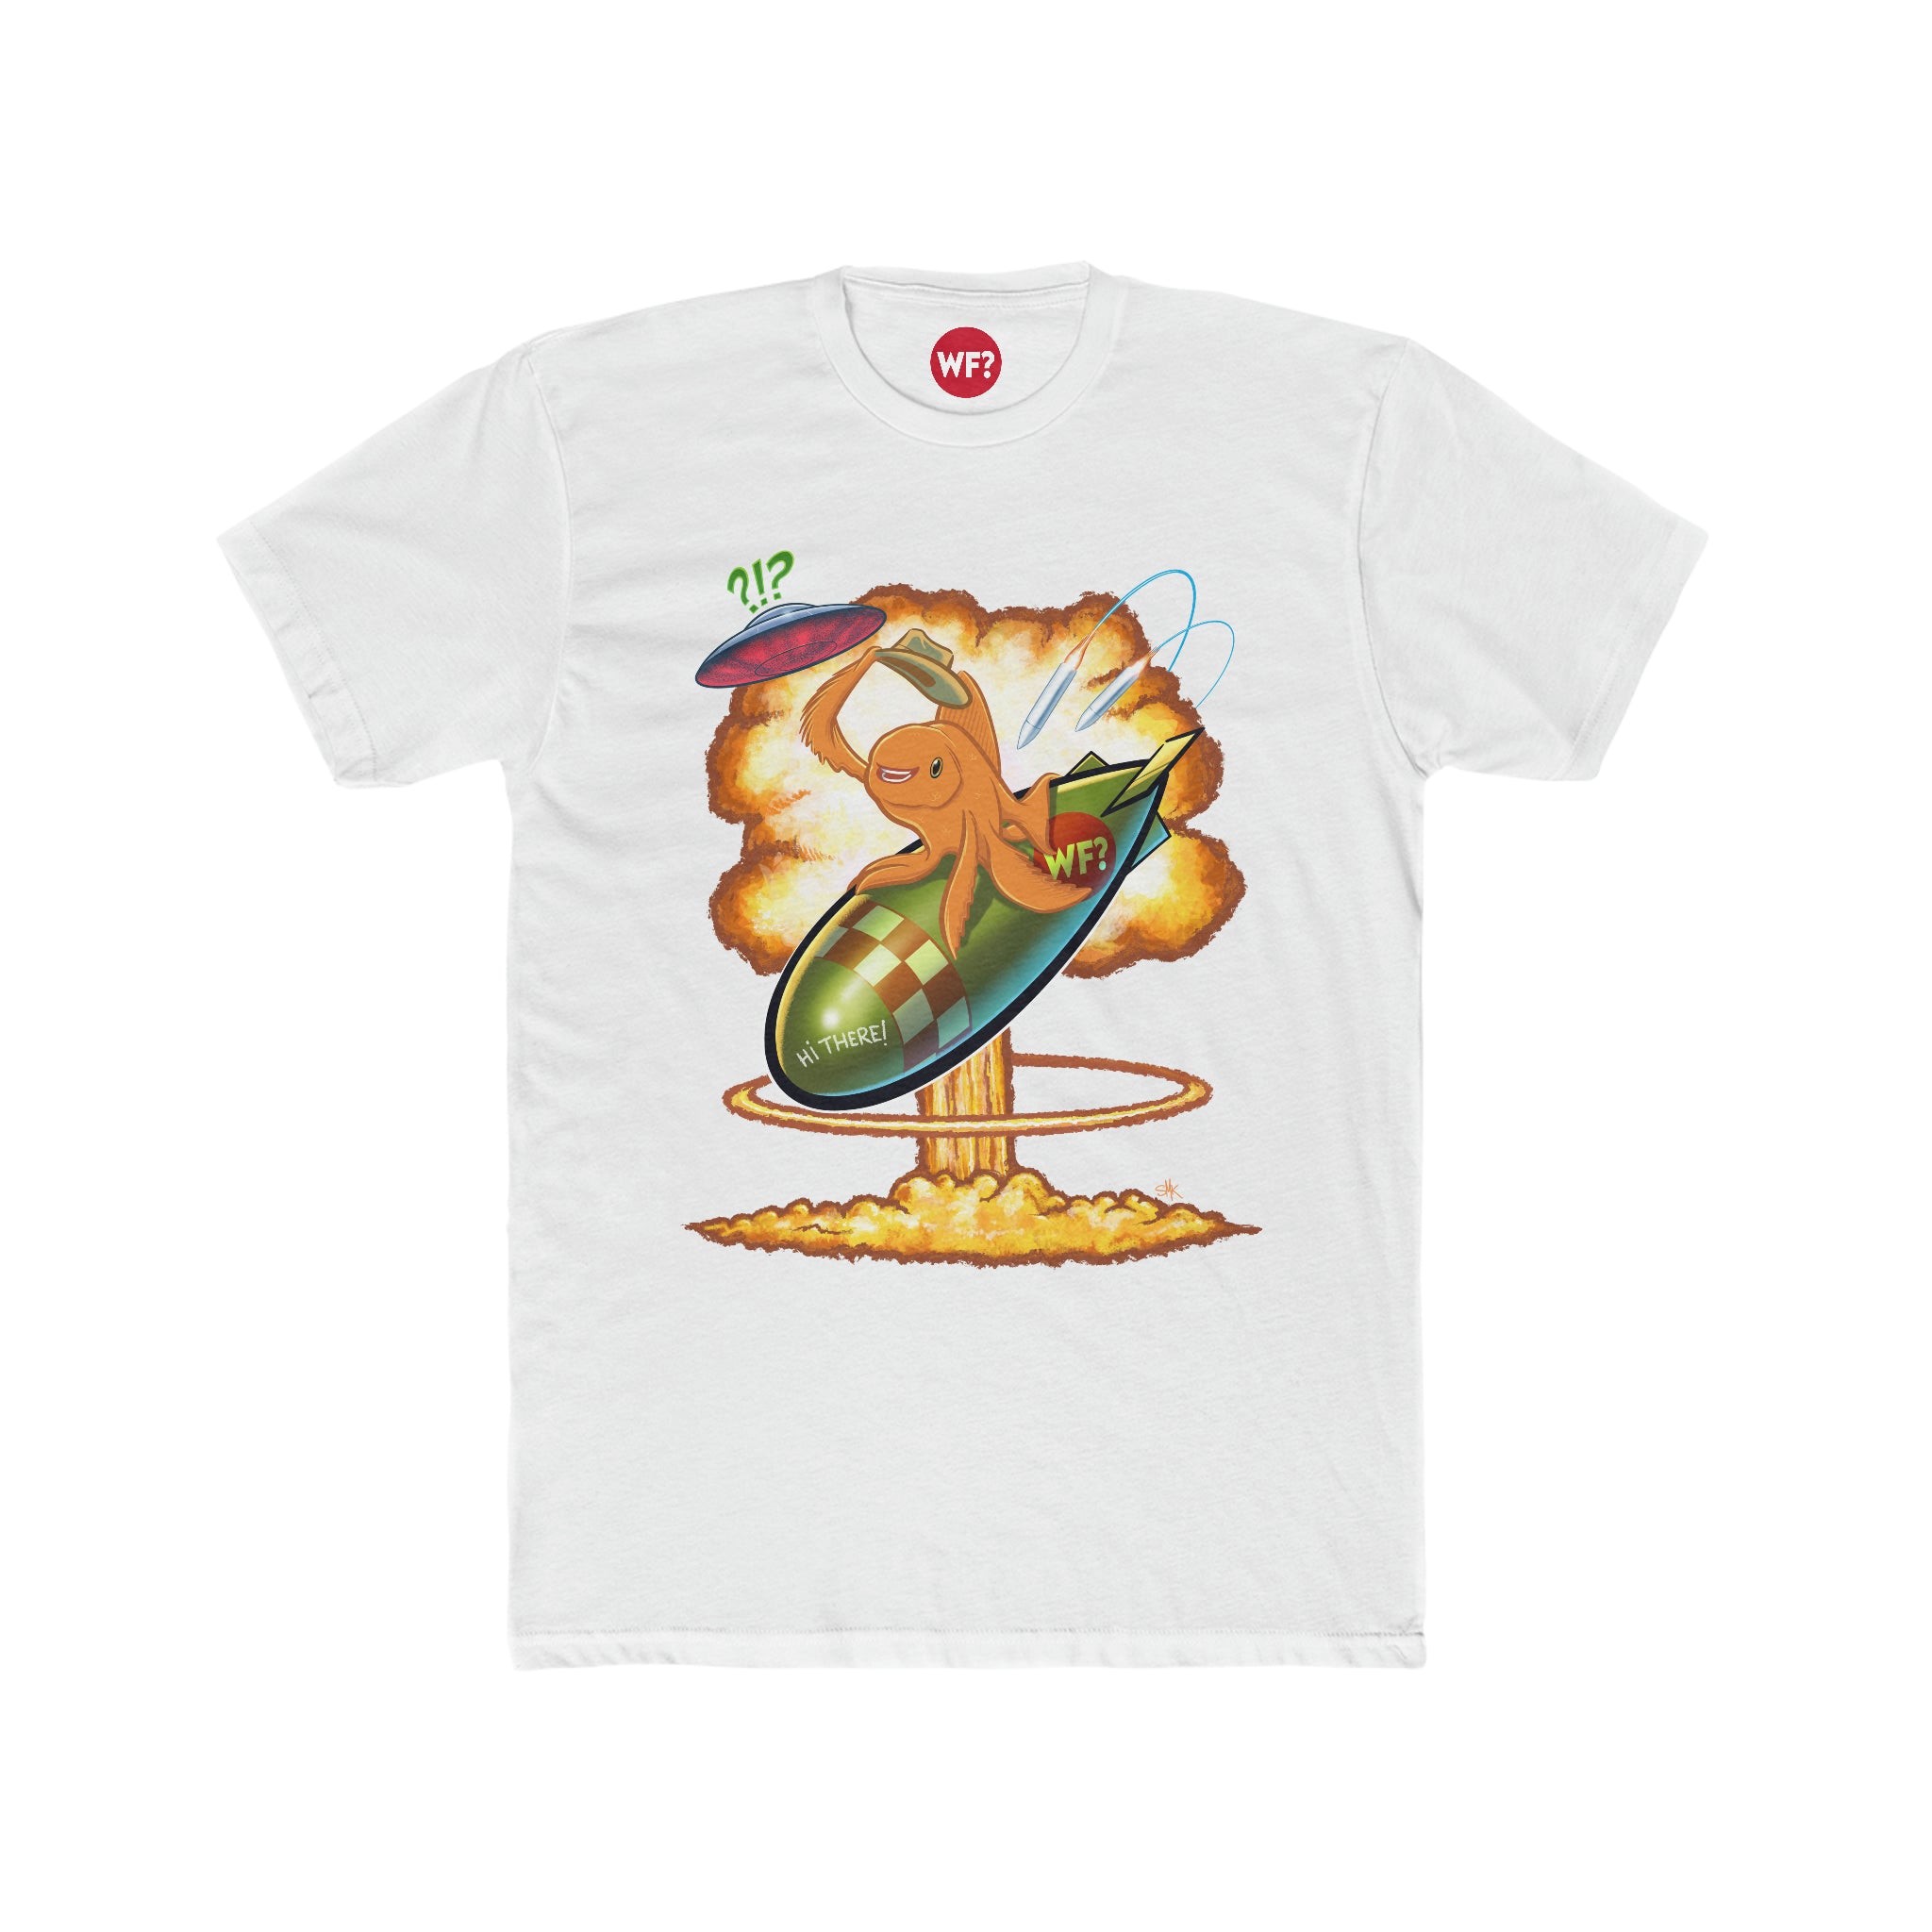 Buy solid-white World War 3 Limited T-Shirt